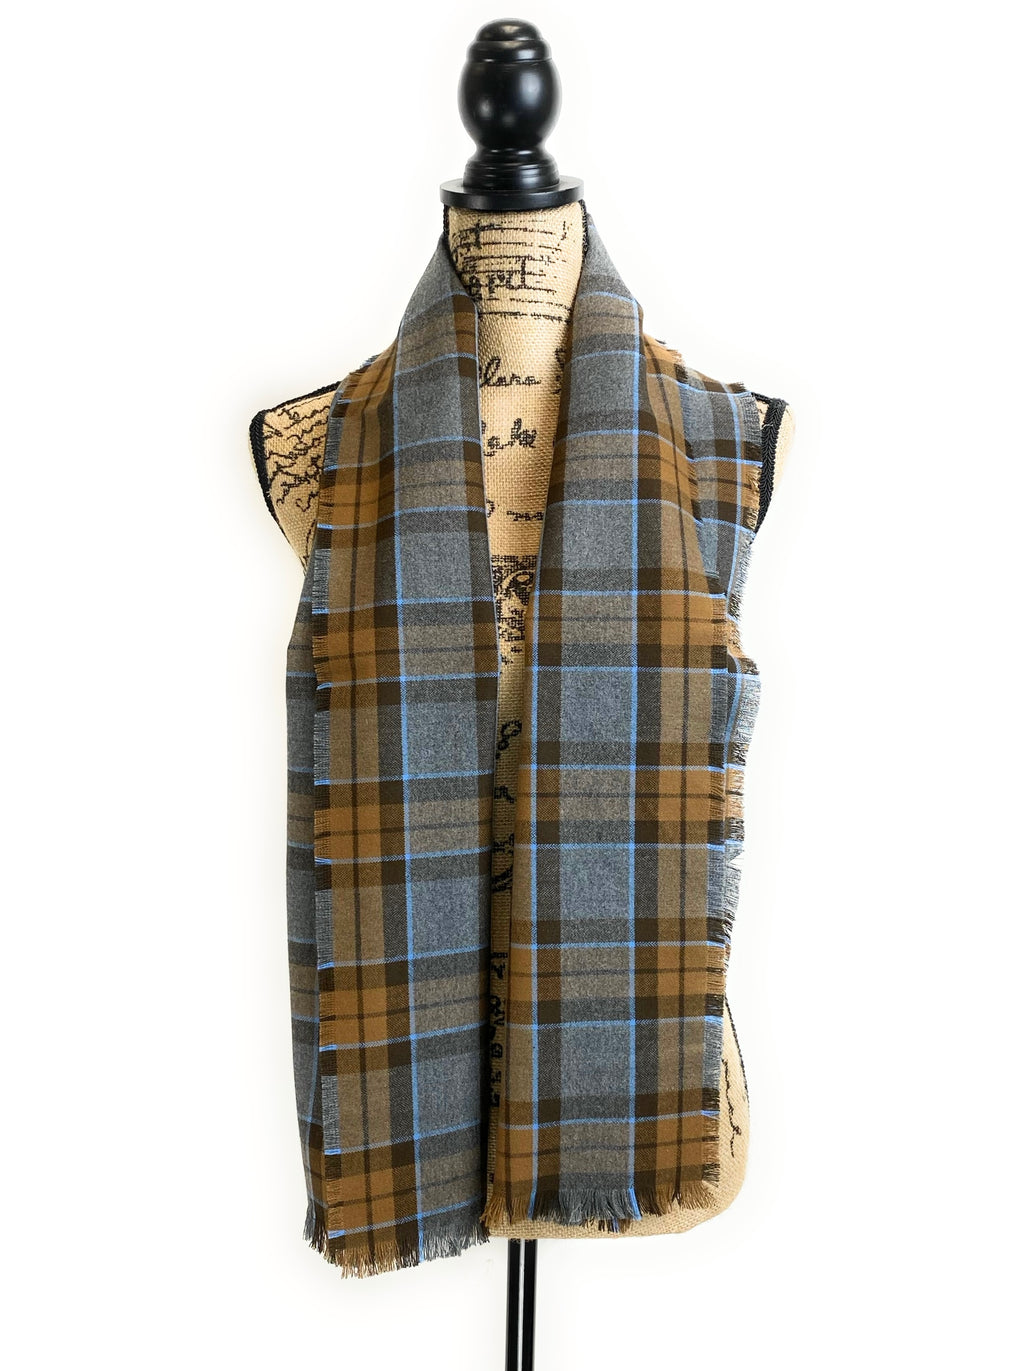 Ascot Scarf - Outlander Clan MacKenzie Inspired Gray, Brown and Light Blue Cotton Flannel